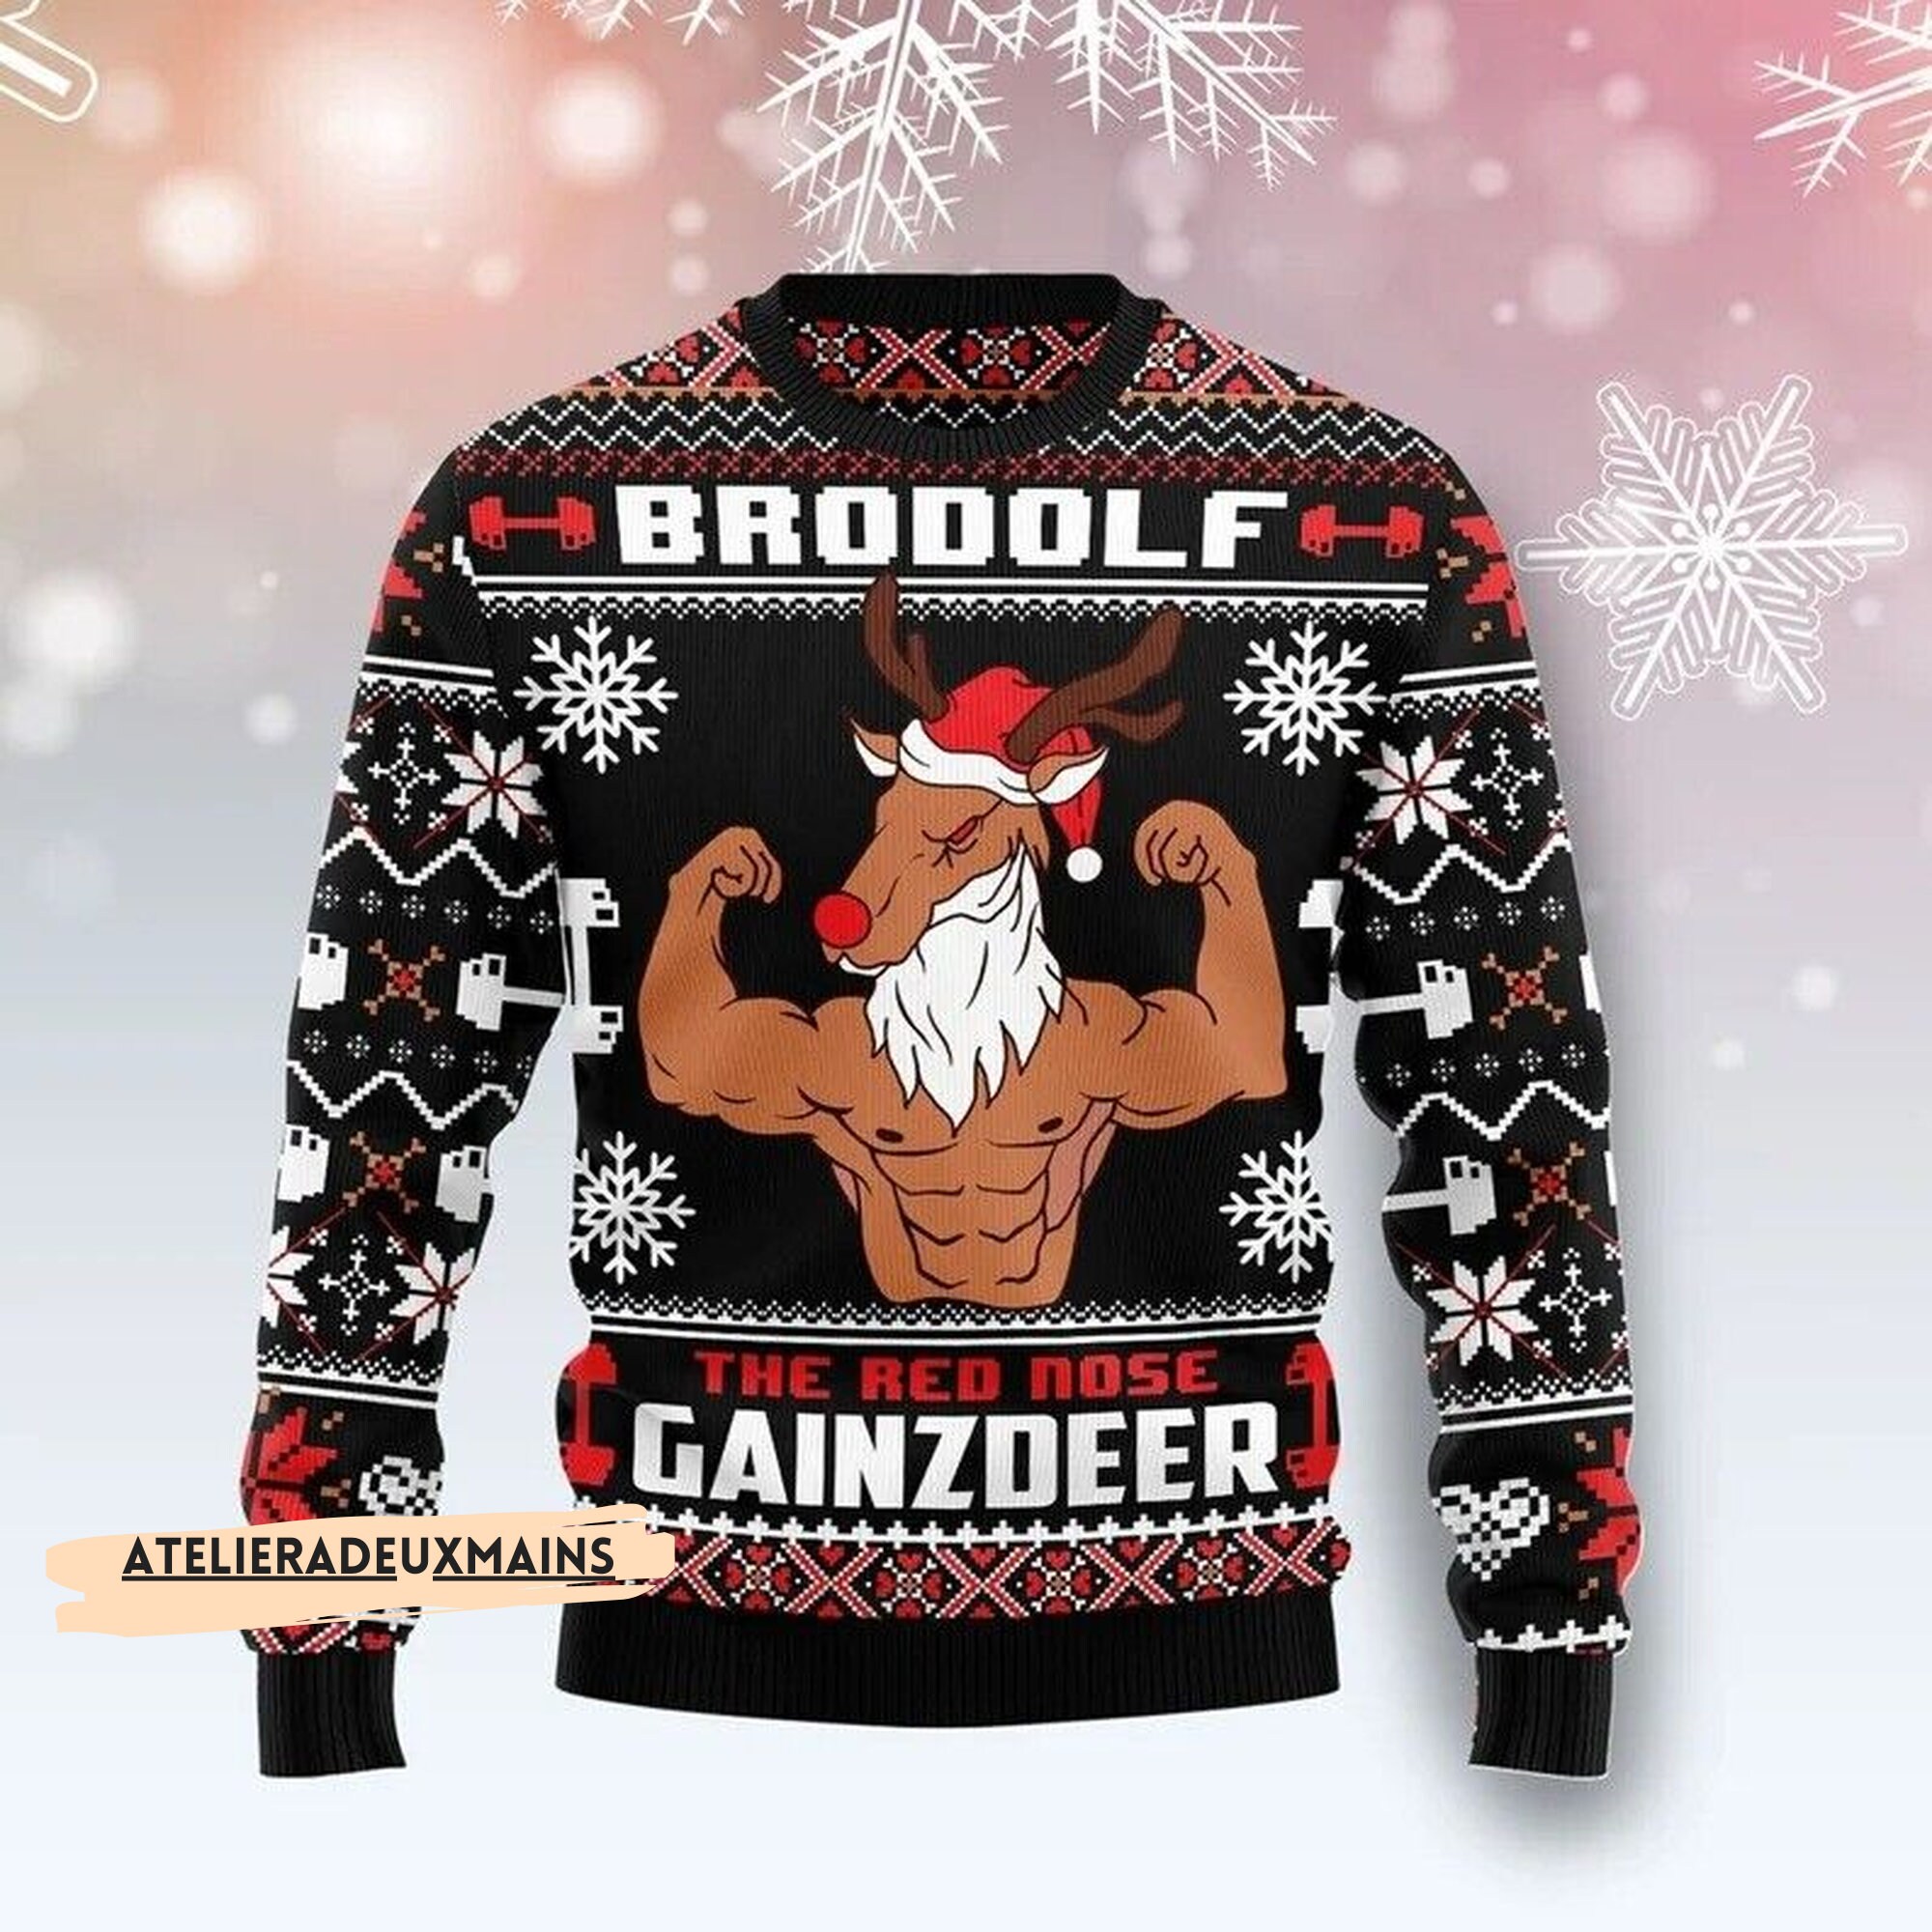 Discover Brodolf The Red Nose Gainzdeer Gym Ugly Christmas Sweater, Knitted Sweater